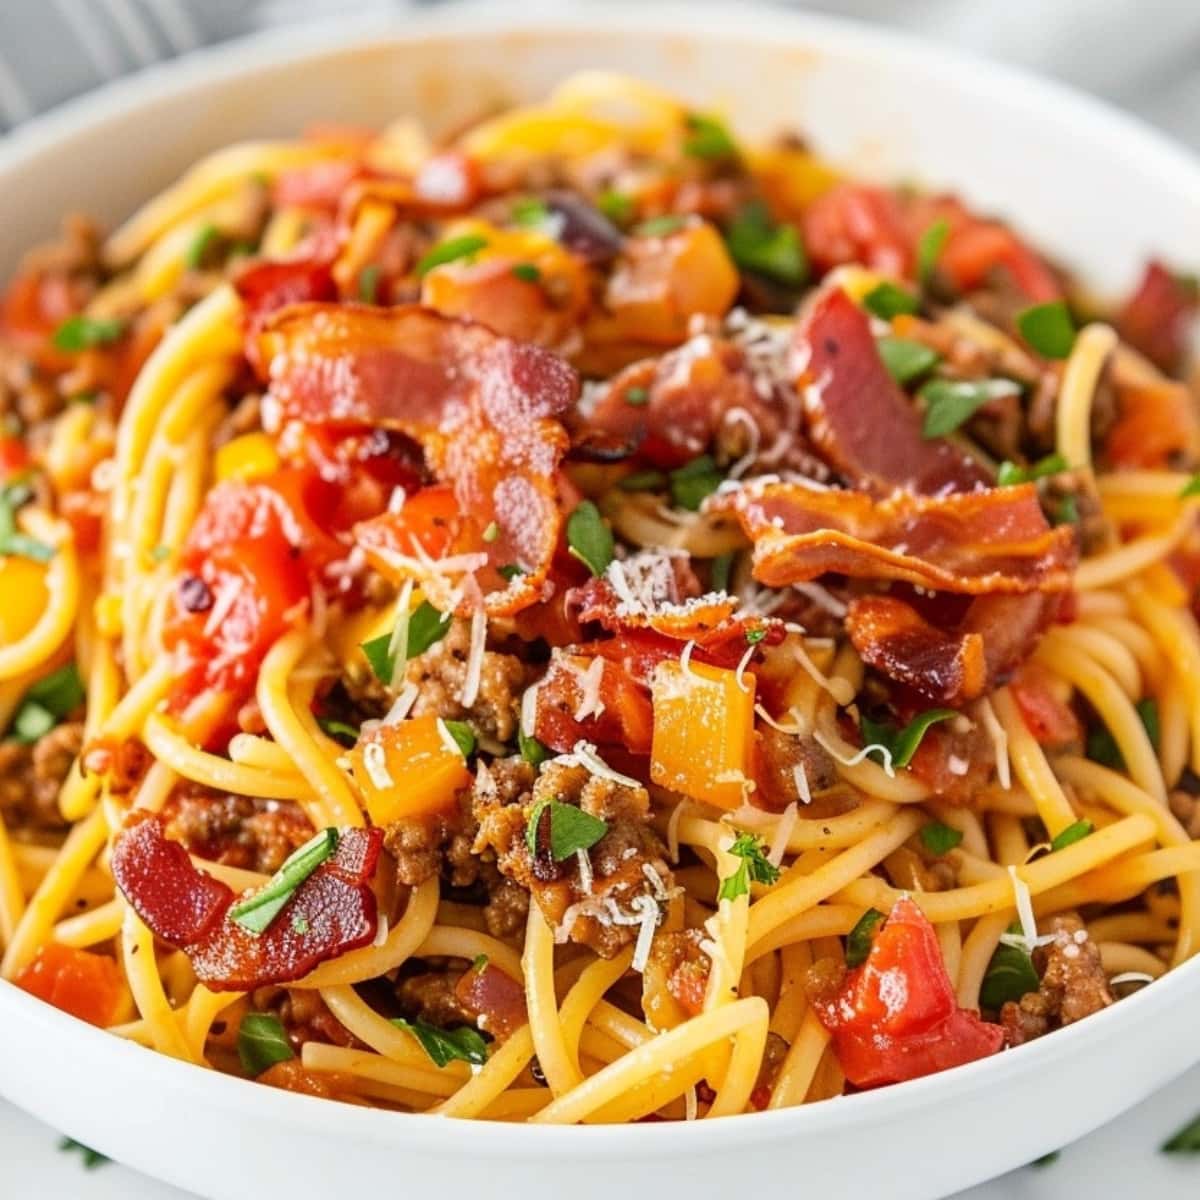 Cowboy spaghetti with ground beef bacon and cheese